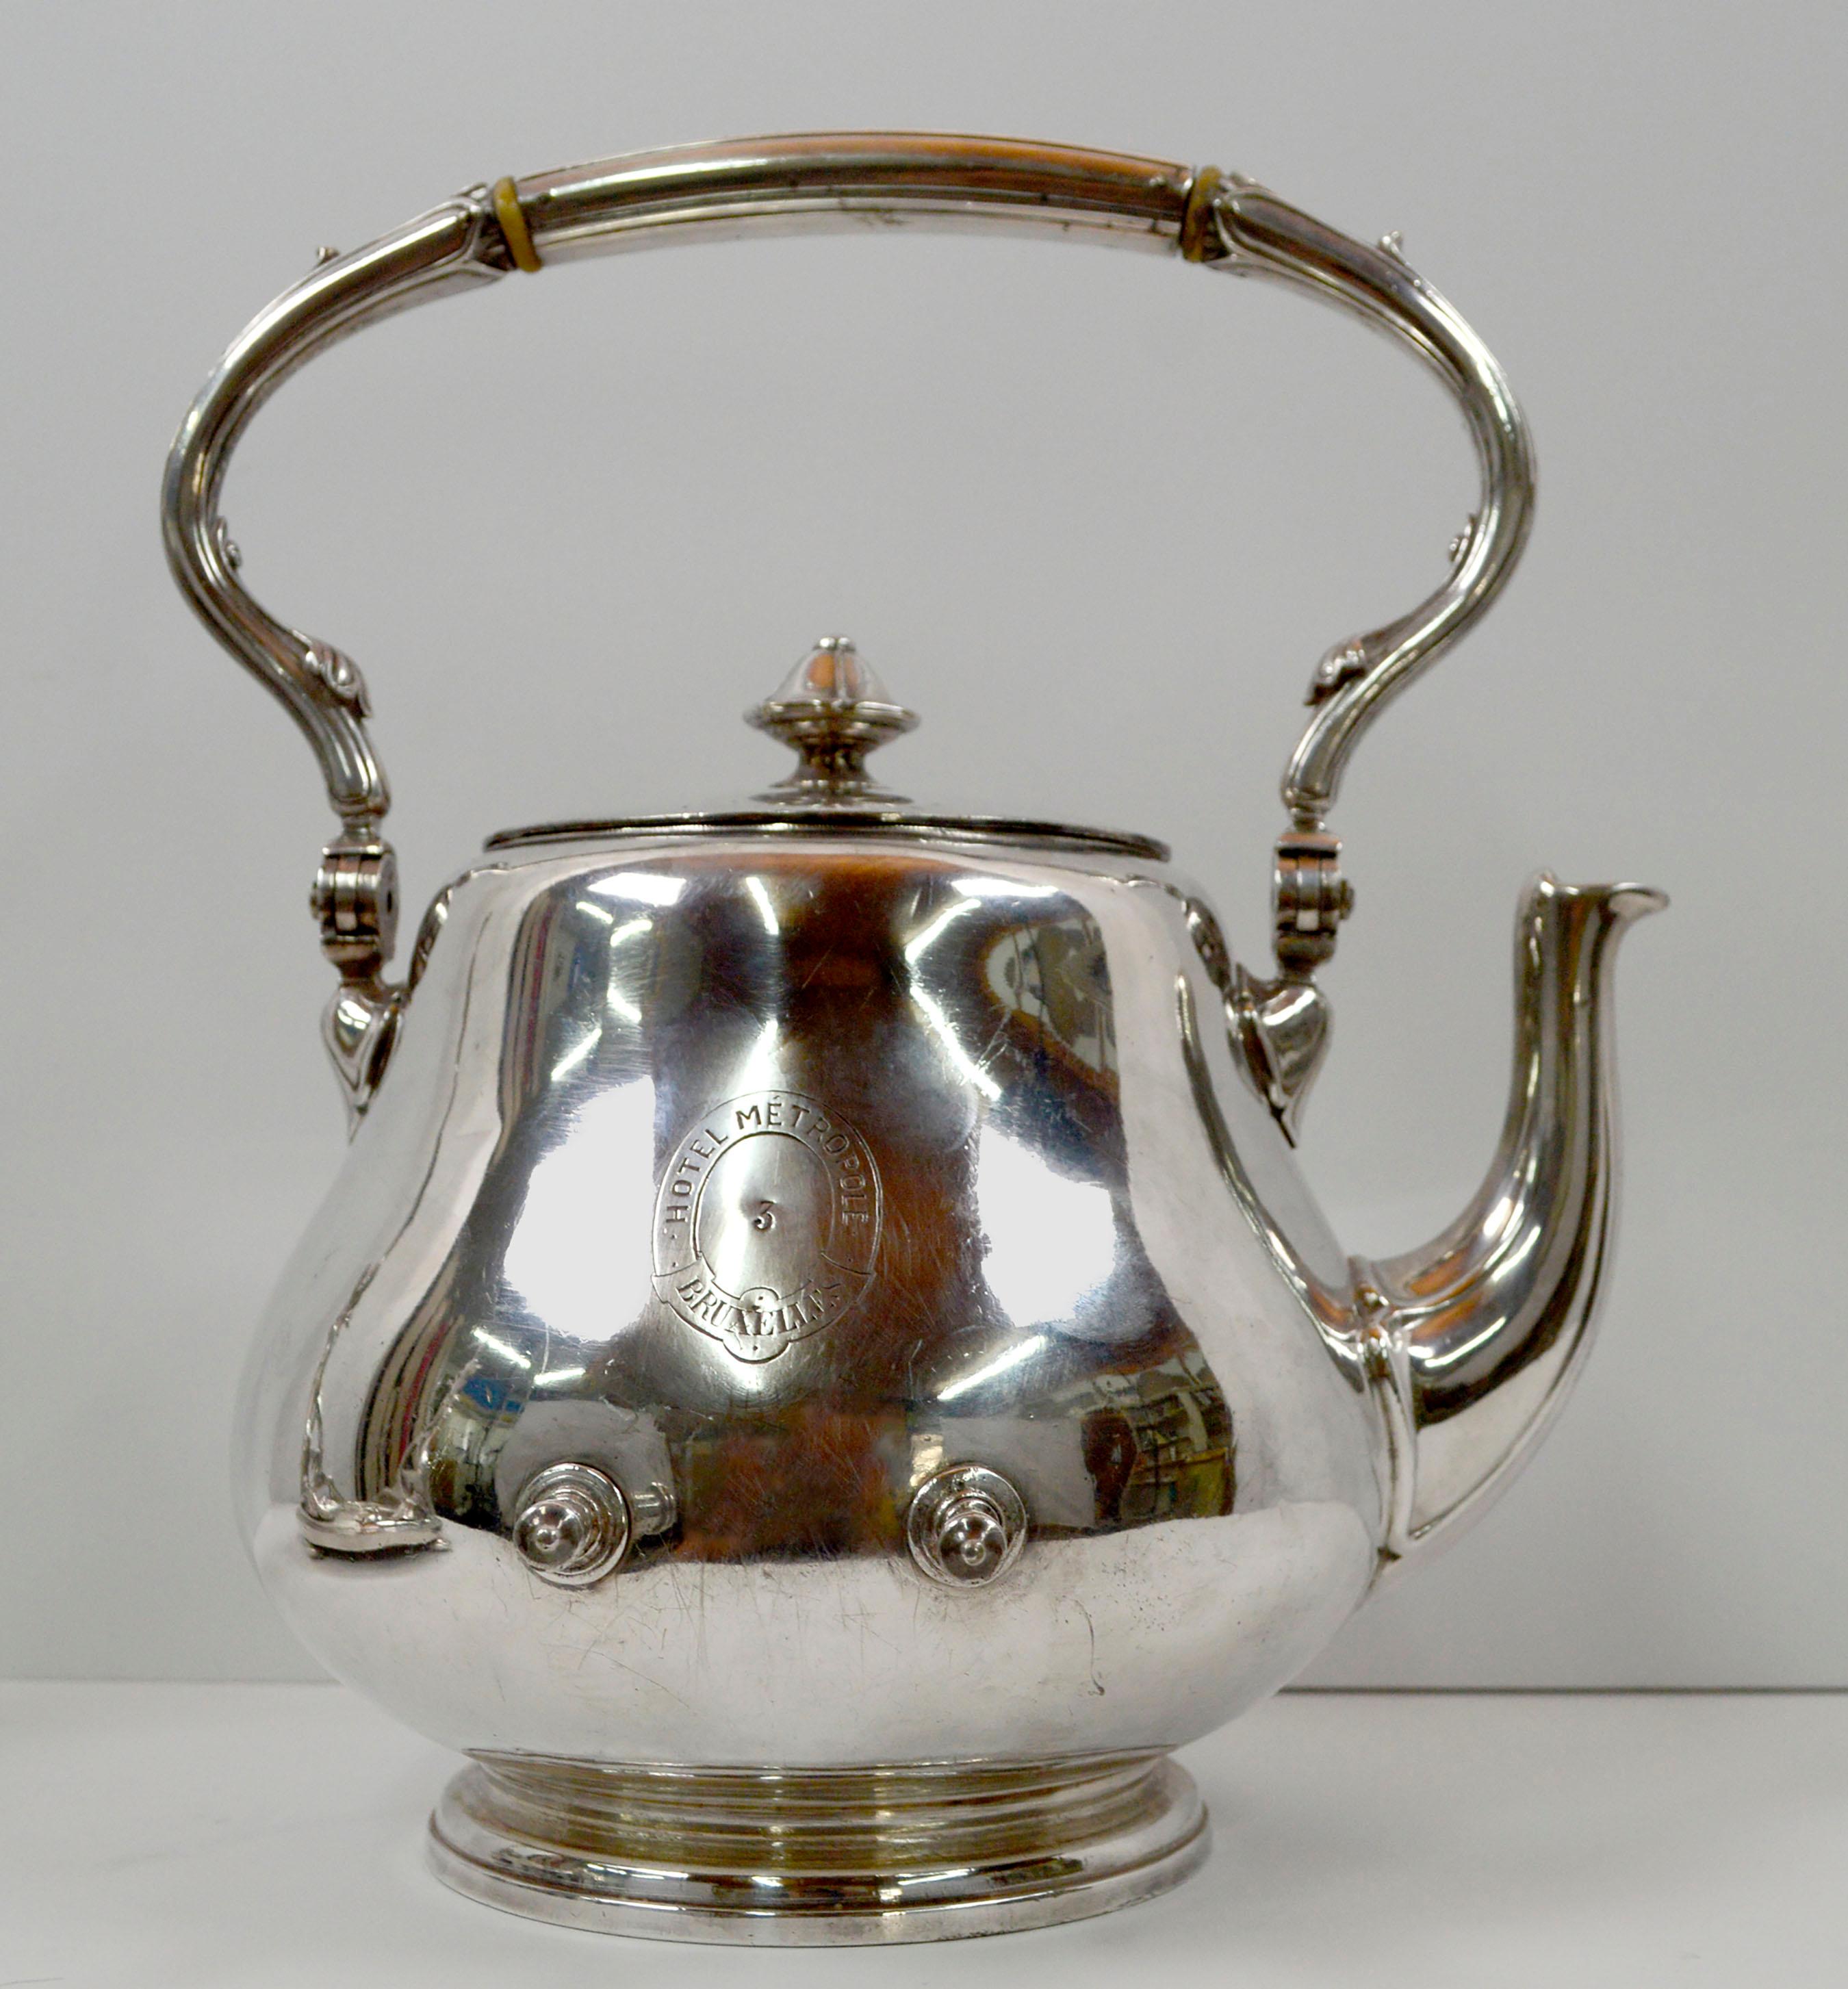 Victorian Early 20th Cent. Christofle Hotel Metropole Silver Plated Tilting Teapot & Stand